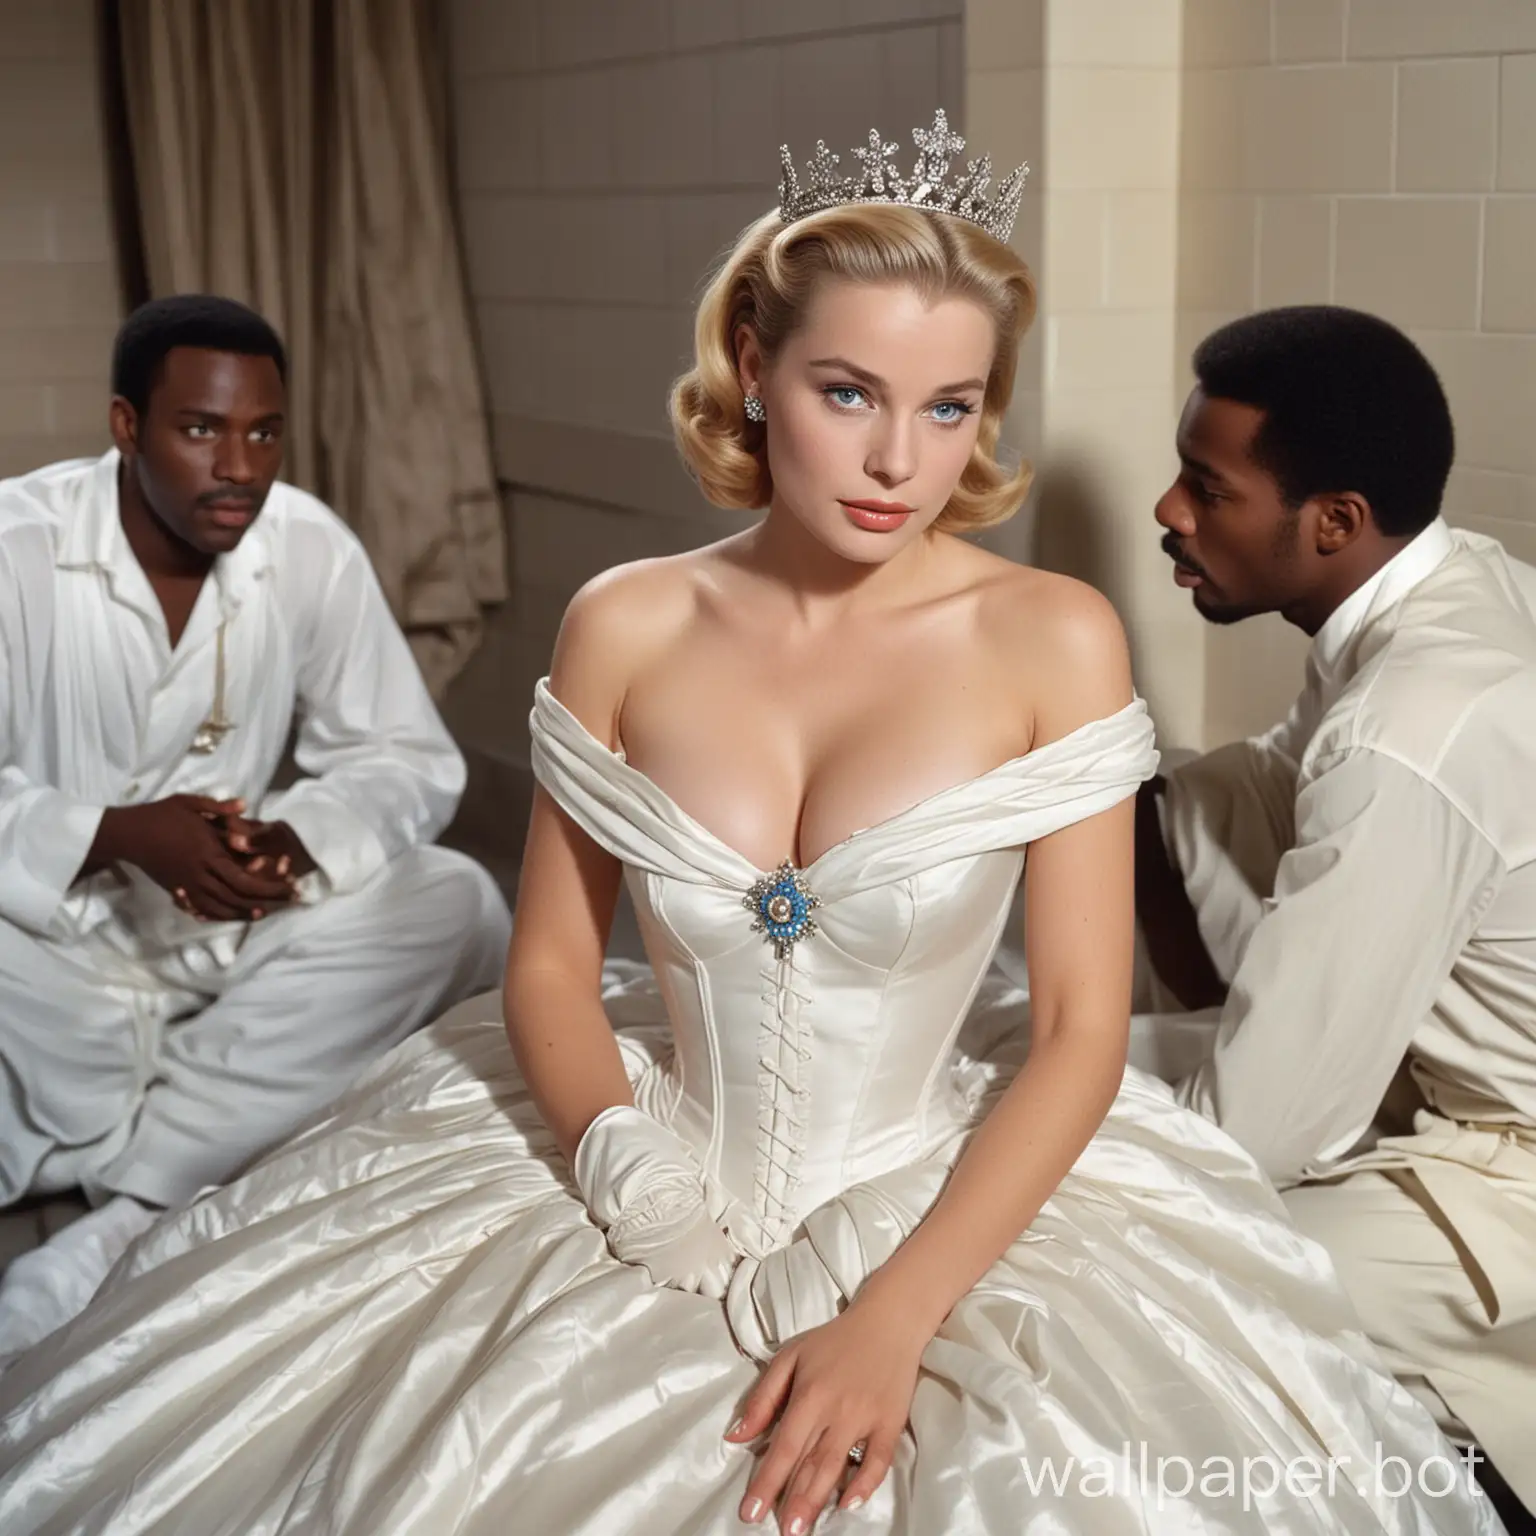 In a men's public restroom, a white, young actress with blonde hair and blue eyes, Grace Kelly, (who is characterized by her beauty) is on her knees, crowned as a queen in a white silk off-shoulder, sleeveless dress, a white silk push-up corset, and white silk opera length gloves. There is disgust on her face. The white Queen, in her crown, begs on her knees in front of two black, male homeless men with their pants down. The Queen's mouth is open extra wide. The view is from above.